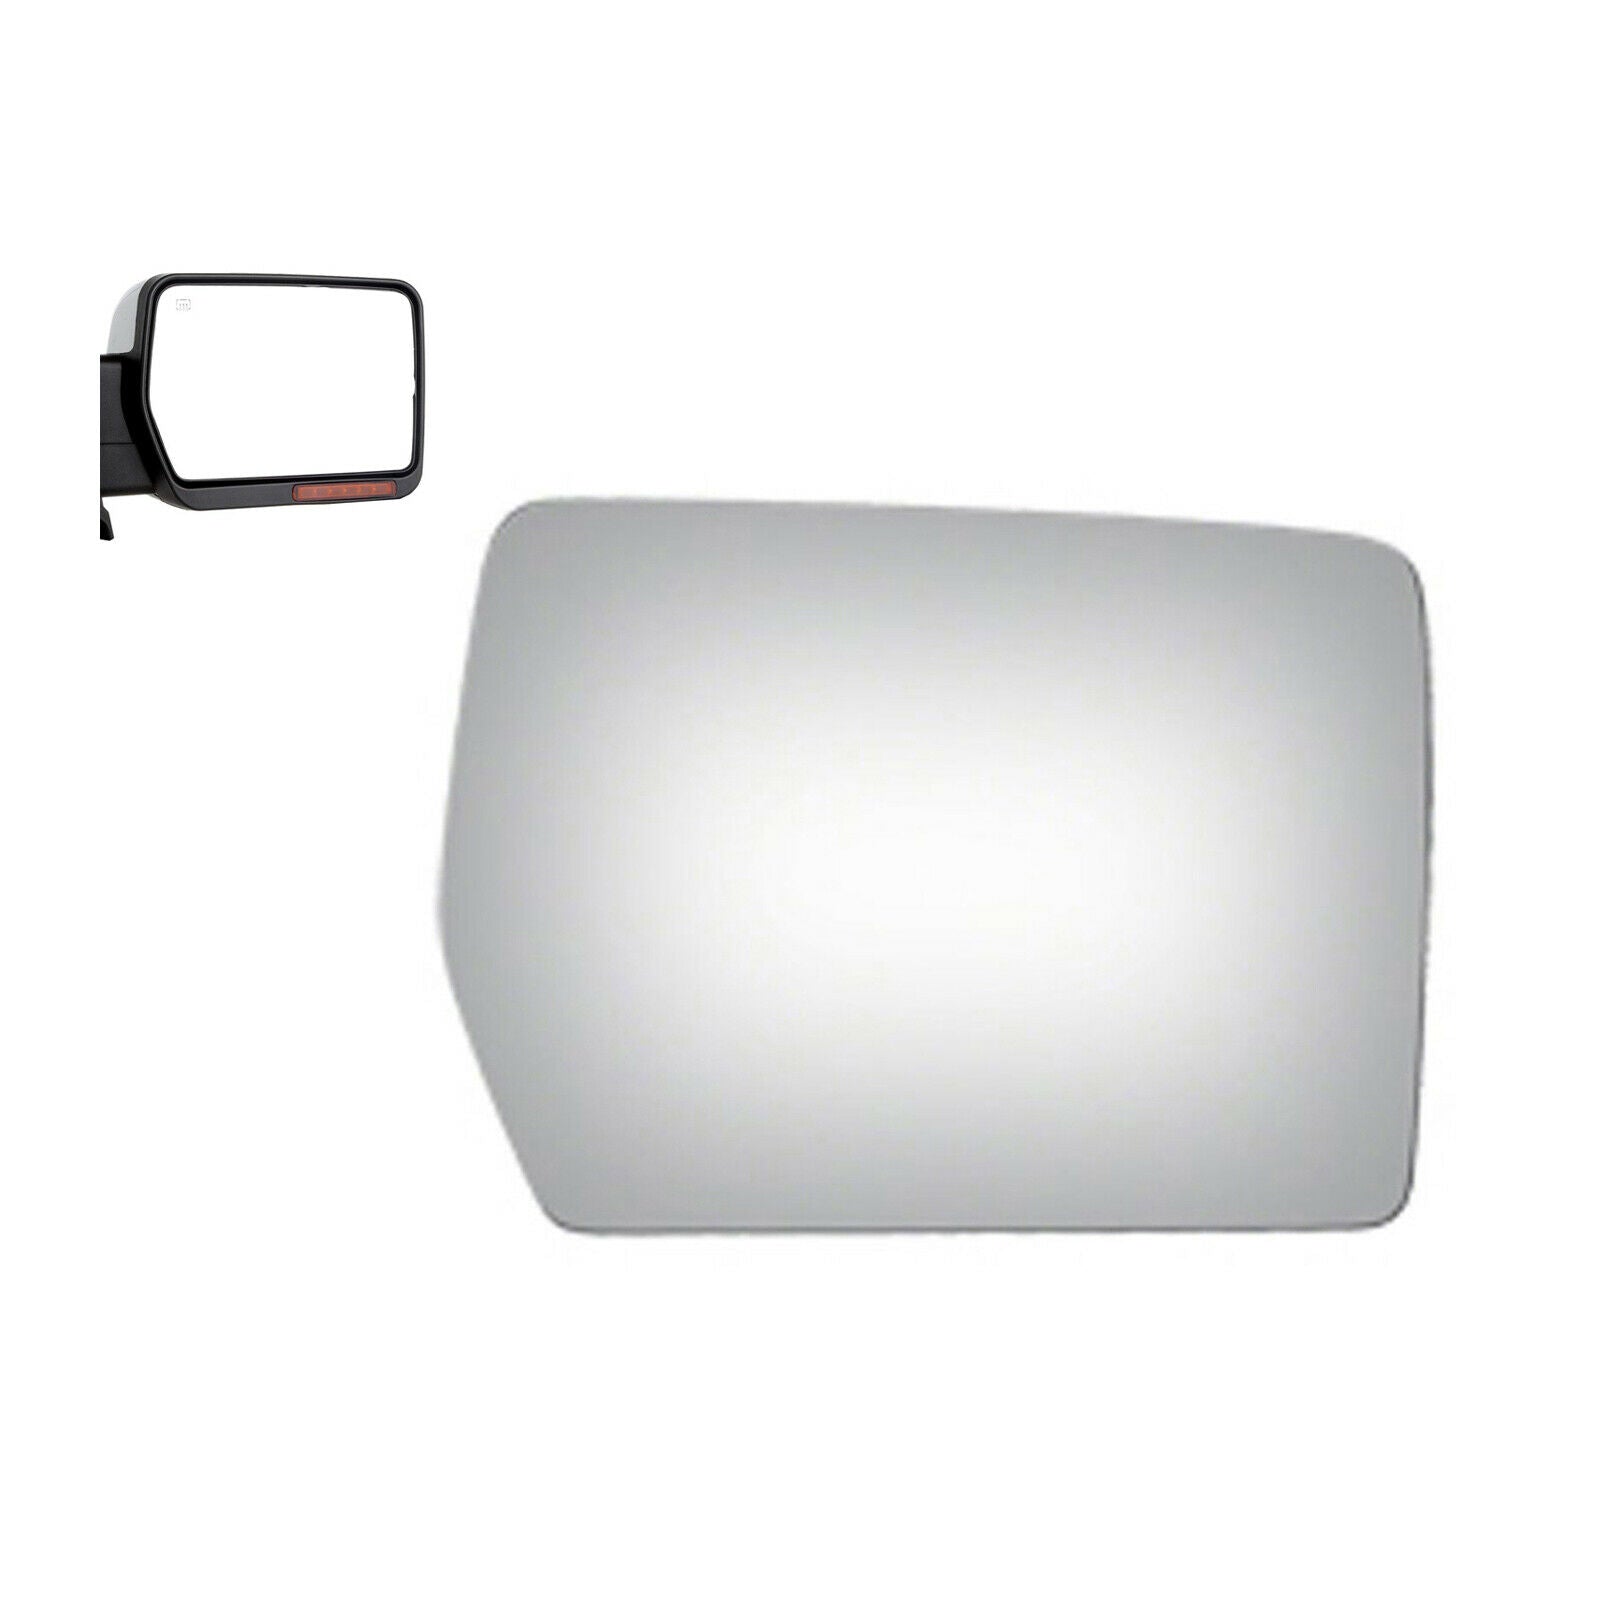 WLLW Replacement Mirror Glass for 2009-2014 Ford F150 Full Size Pickup Truck, Driver Left Side LH/Passenger Right Side RH/The Both Sides Flat Convex M-0012